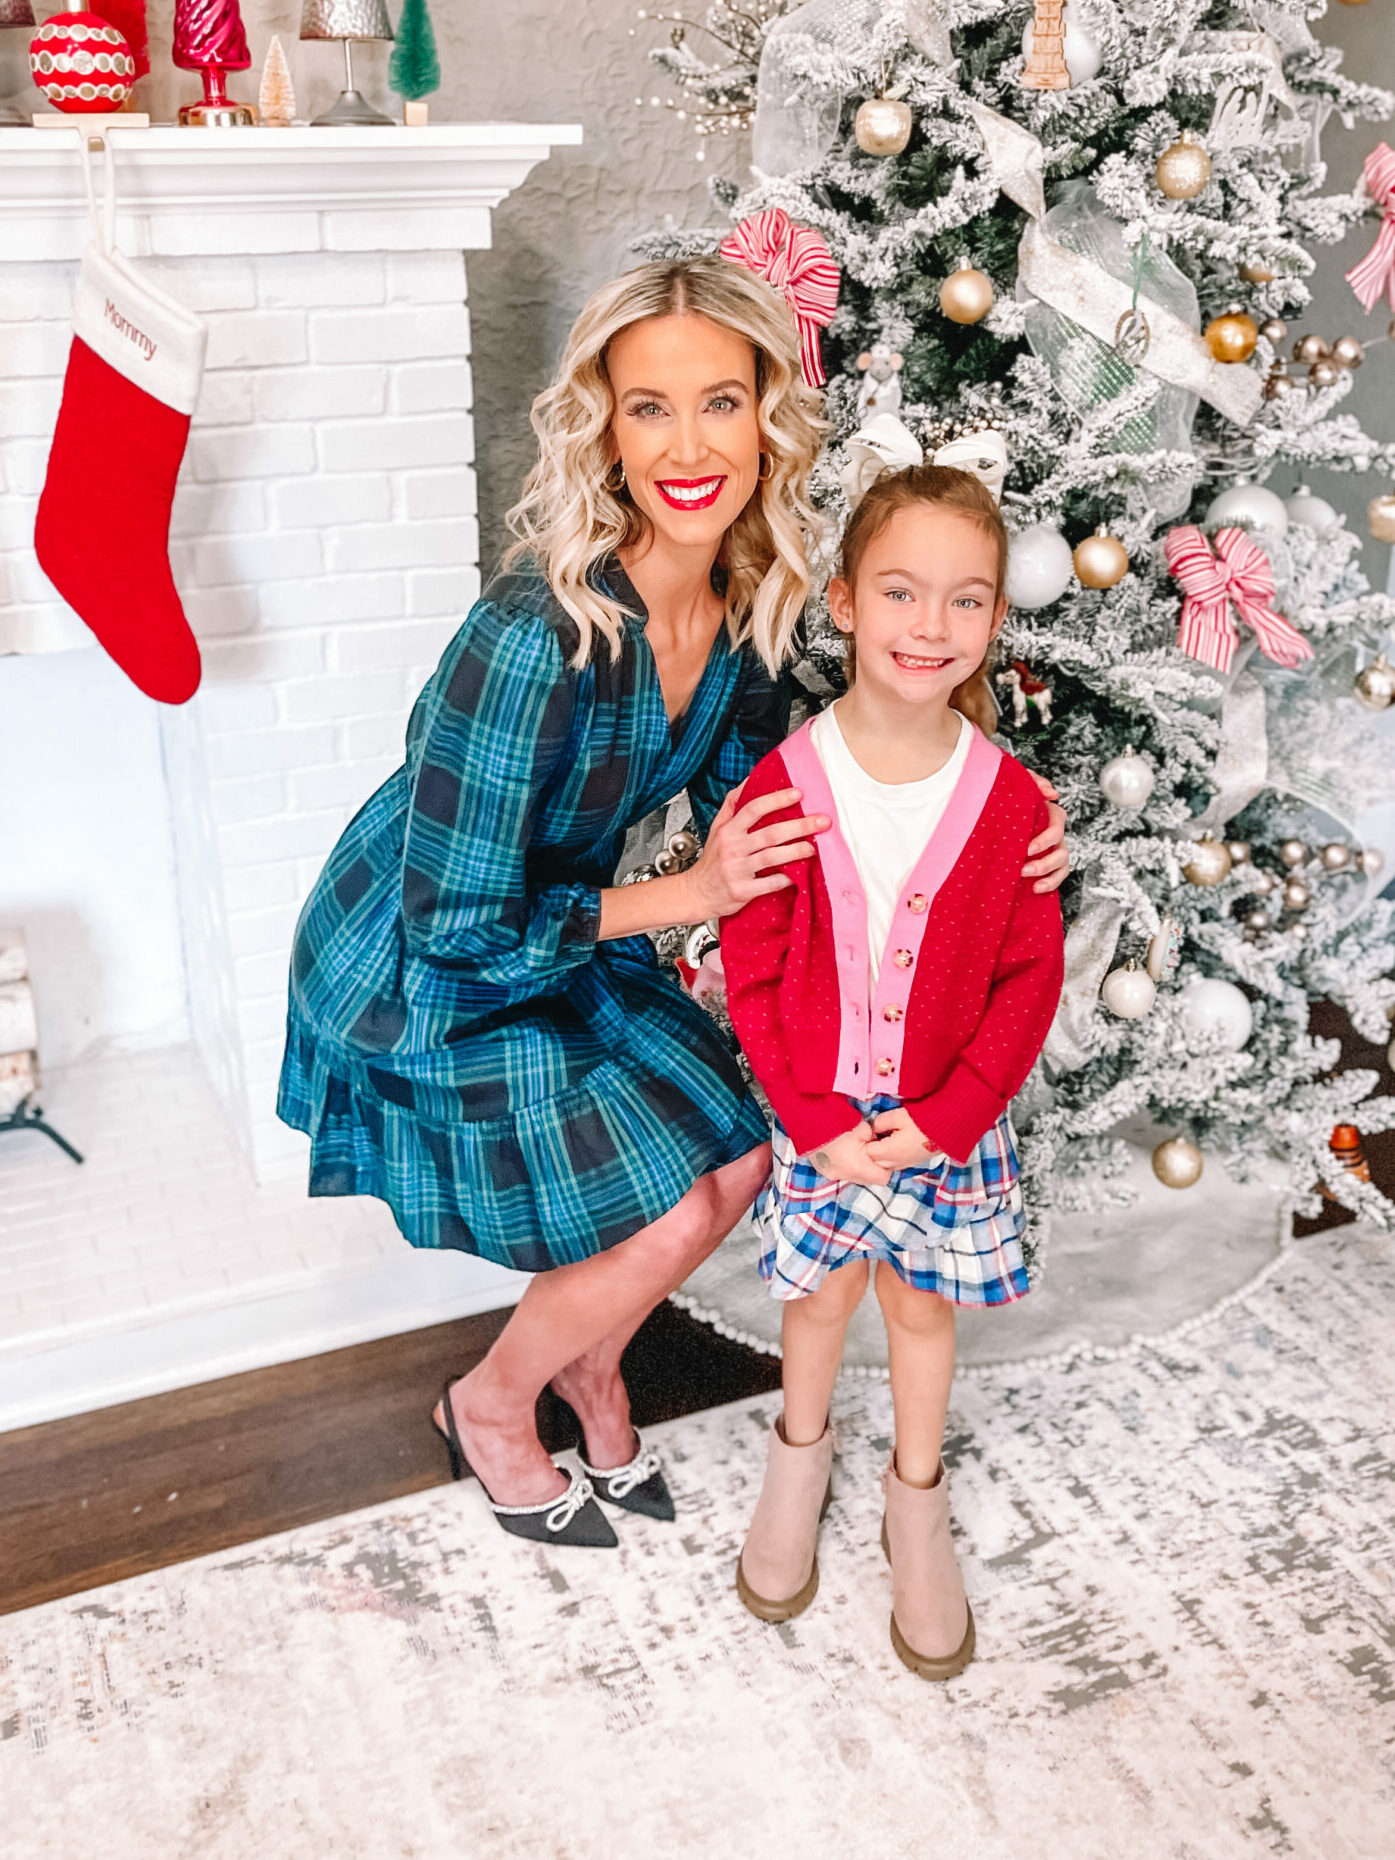 I'm sharing 4 Walmart holiday outfit ideas all super affordable and so festive! How perfect is this $26 plaid dress?!